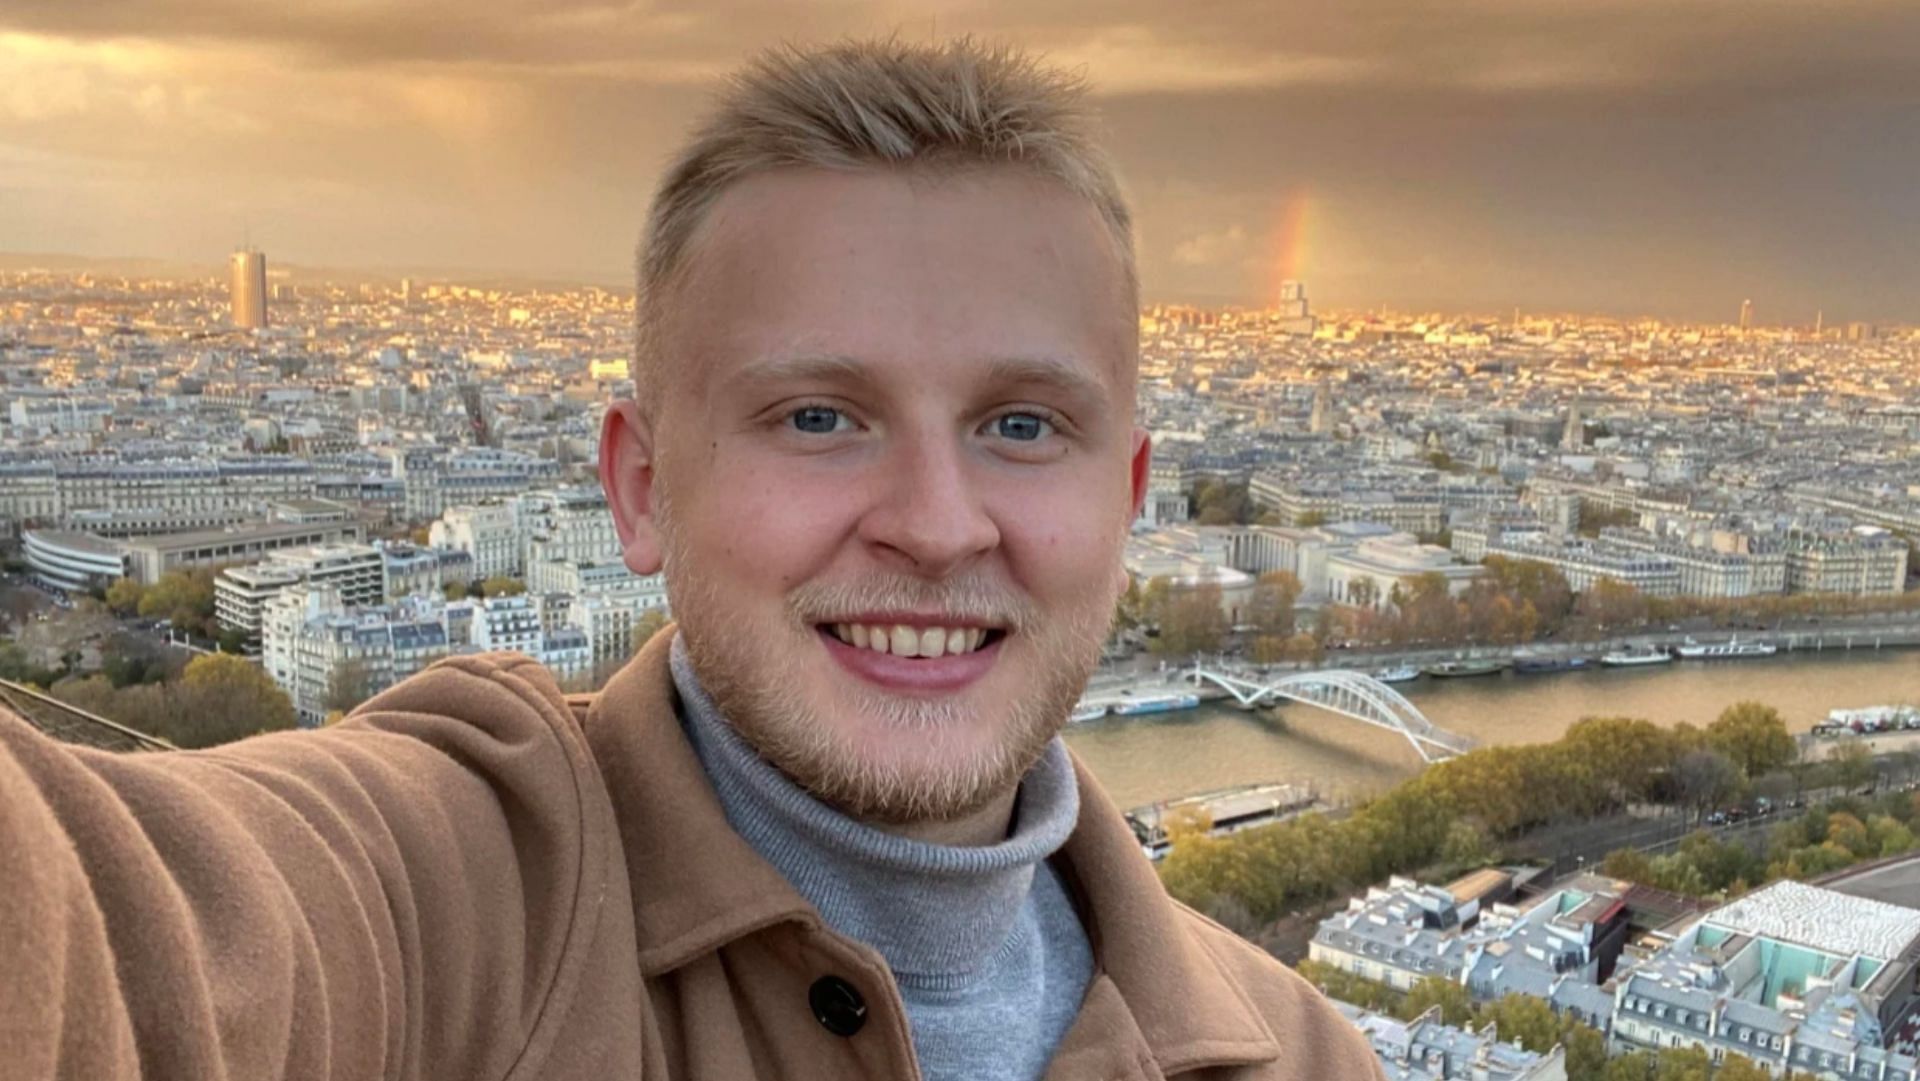 22-year-old Kenny Deland goes missing while studying in France. Parents launch a website to plead for help. (Image via Facebook/Ken Deland)